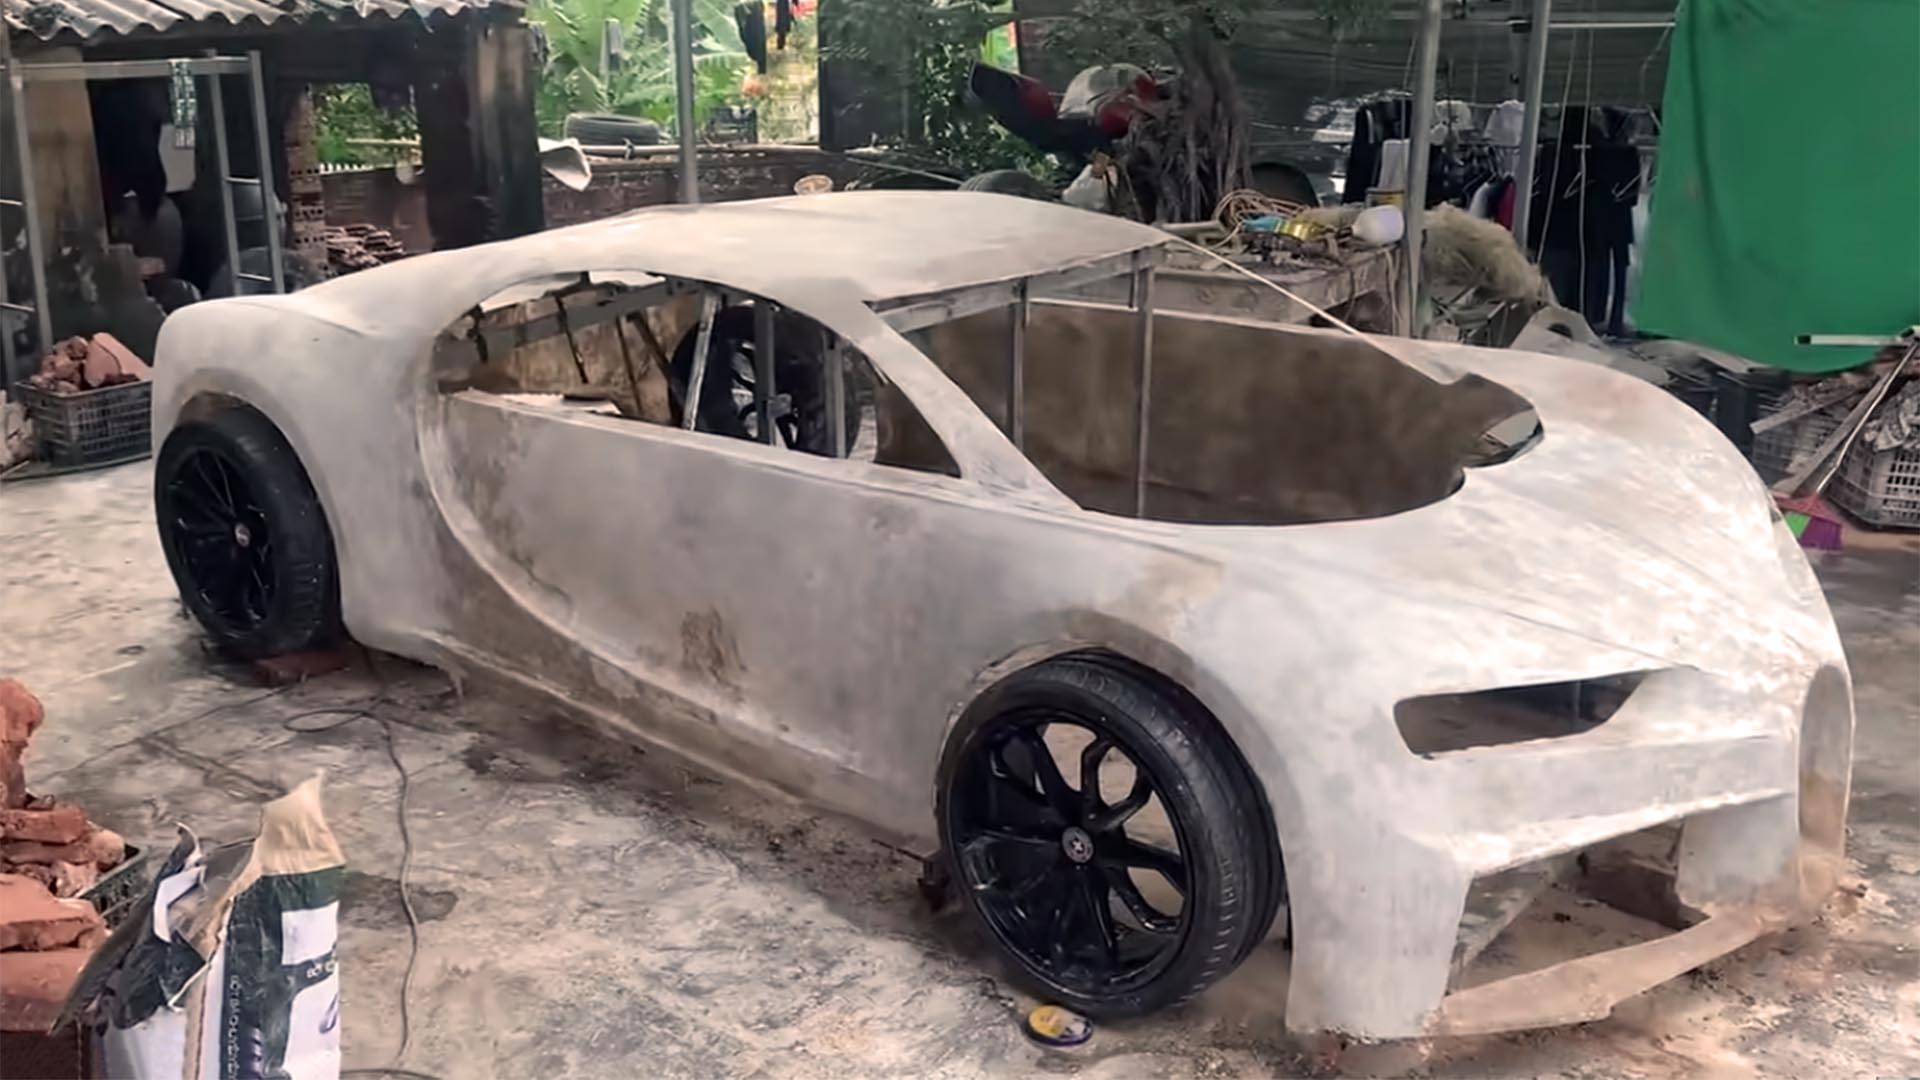 The body with the fiberglass process on the mud, which gave the material rigidity and sanding and painting possibilities. 